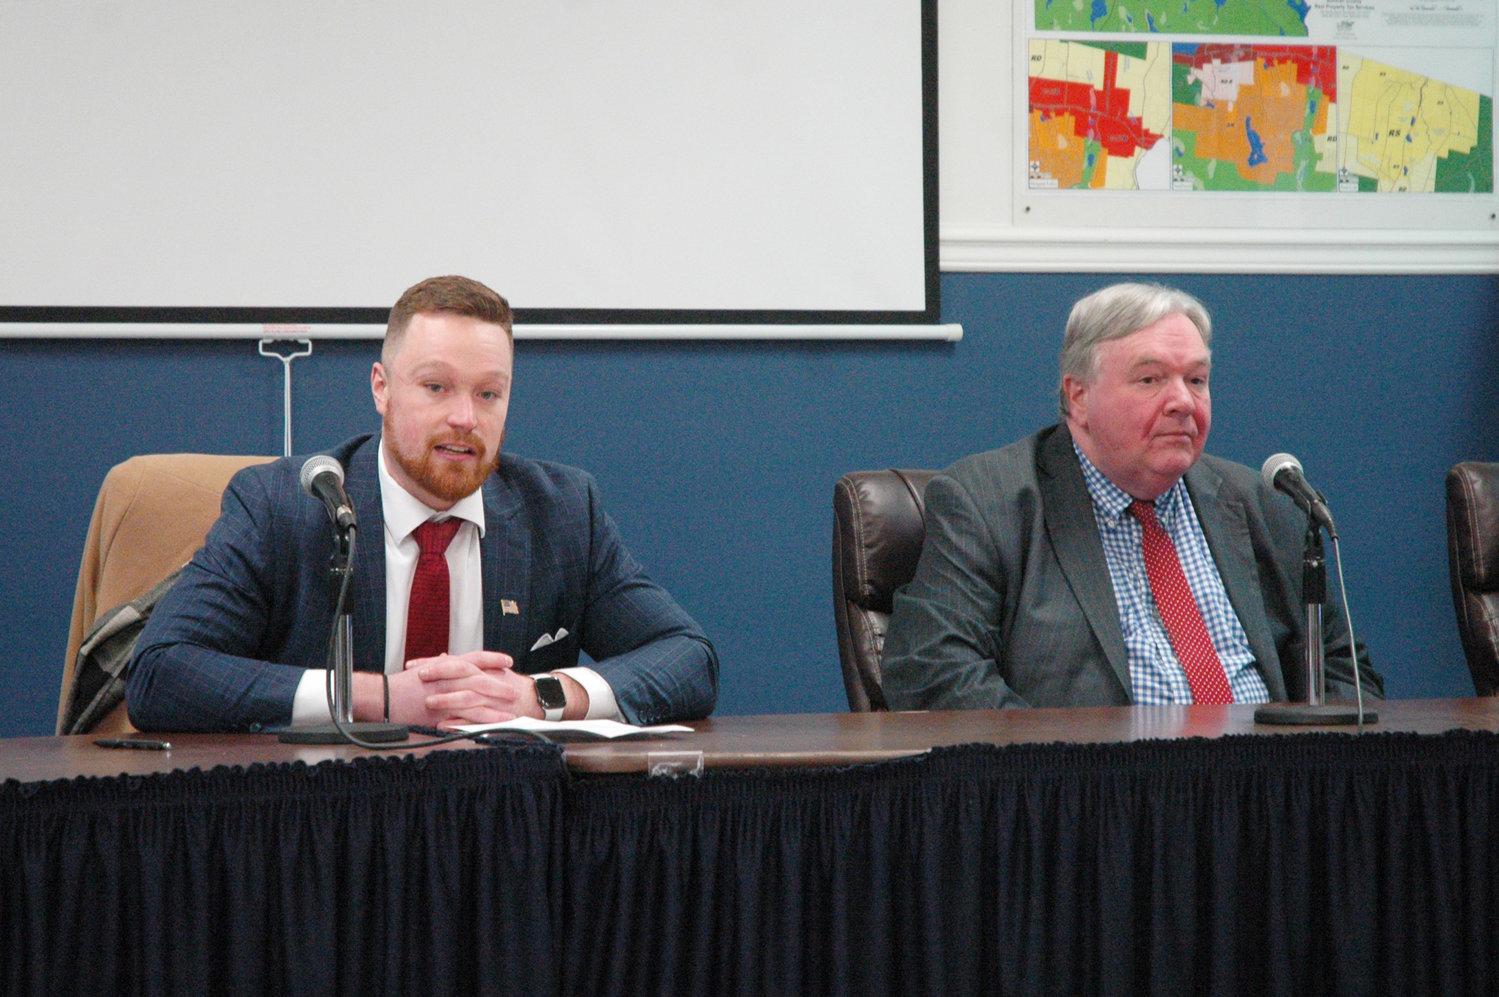 A forum was held between acting Sullivan County District Attorney Brian Conaty and Sullivan County Deputy County Attorney Thomas Cawley as the two prepare to face off in a potential primary before November for the spot on the ballot for the DA position.